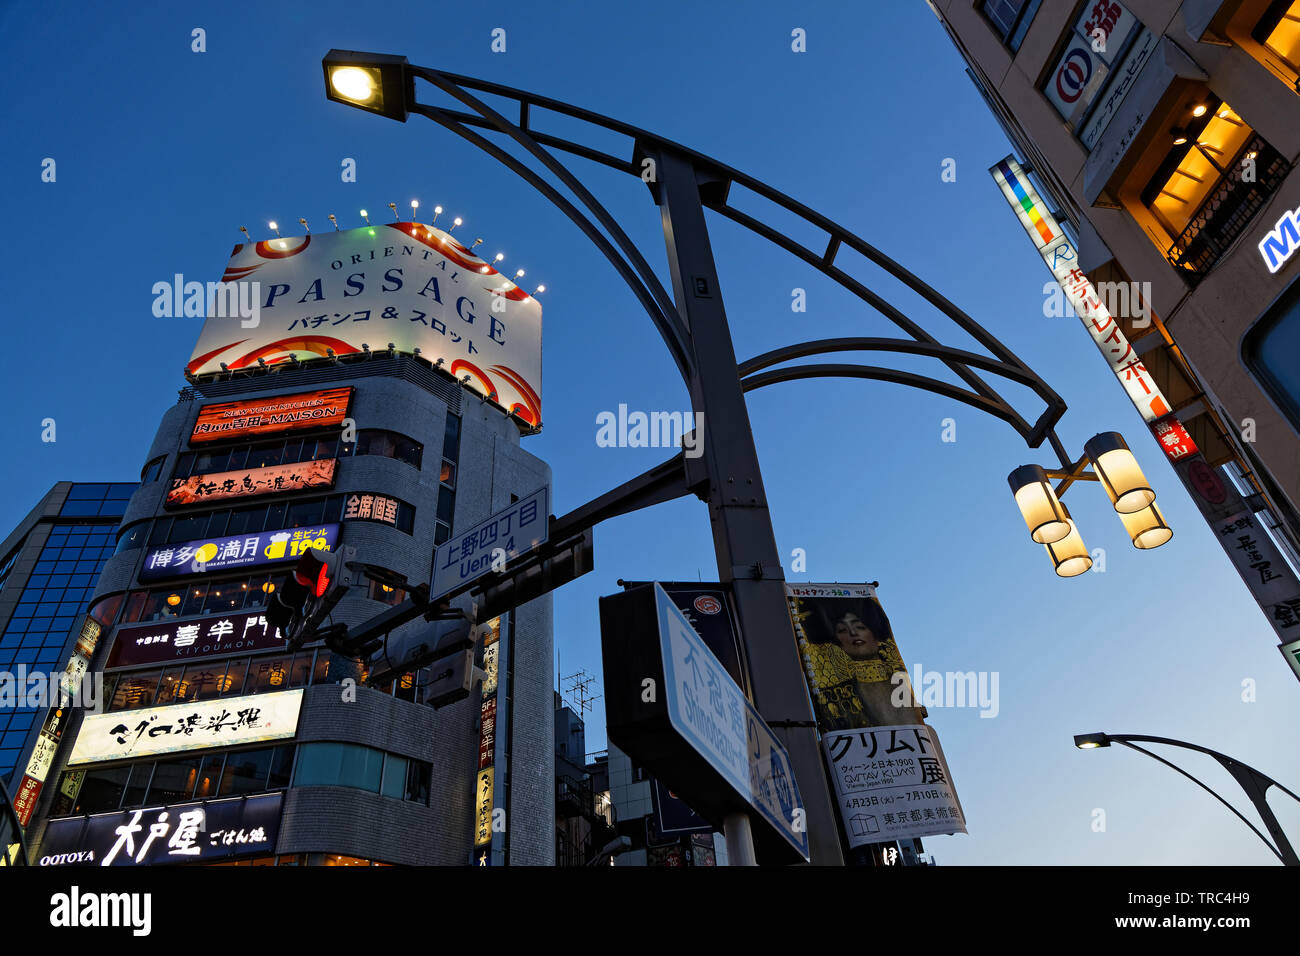 TOKYO, JAPAN, May 16, 2019 : Lights of Ueno district by night. The Greater Tokyo Area is ranked as the most populous metropolitan area in the world. Stock Photo